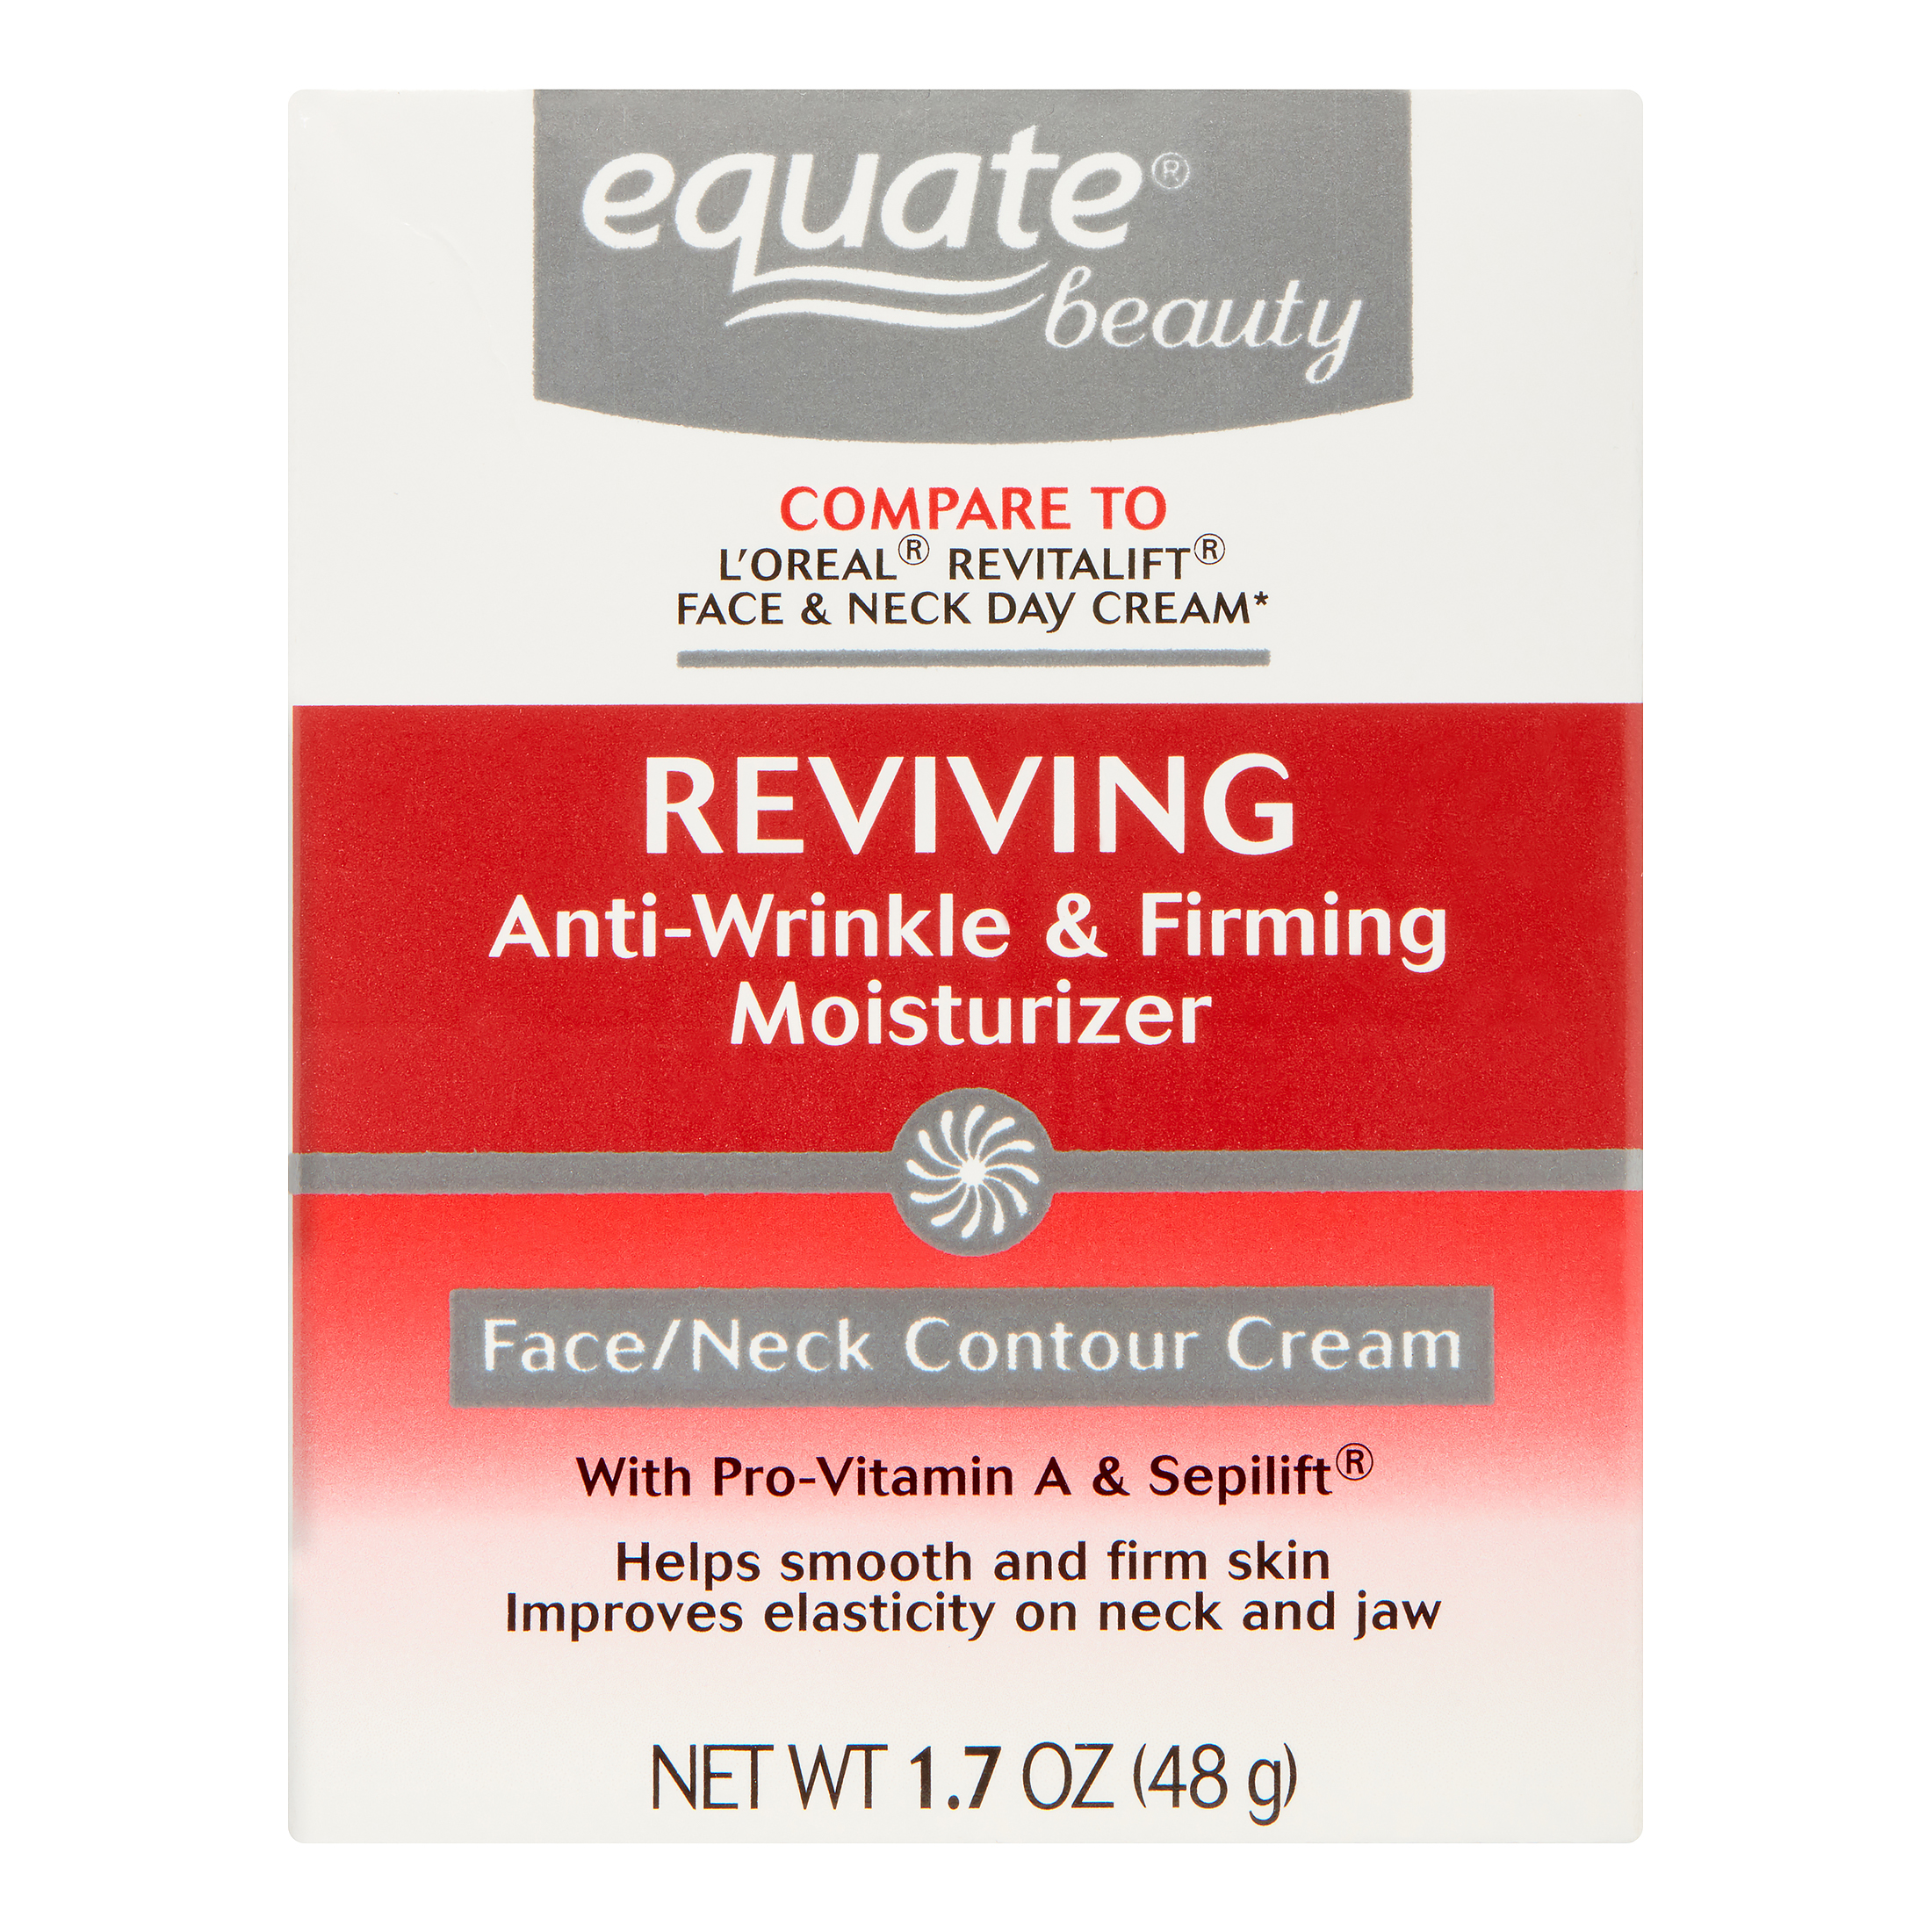 Equate Advanced Firming & Anti-Wrinkle Cream Face and Neck Moisturizer, 1.7oz - image 4 of 9